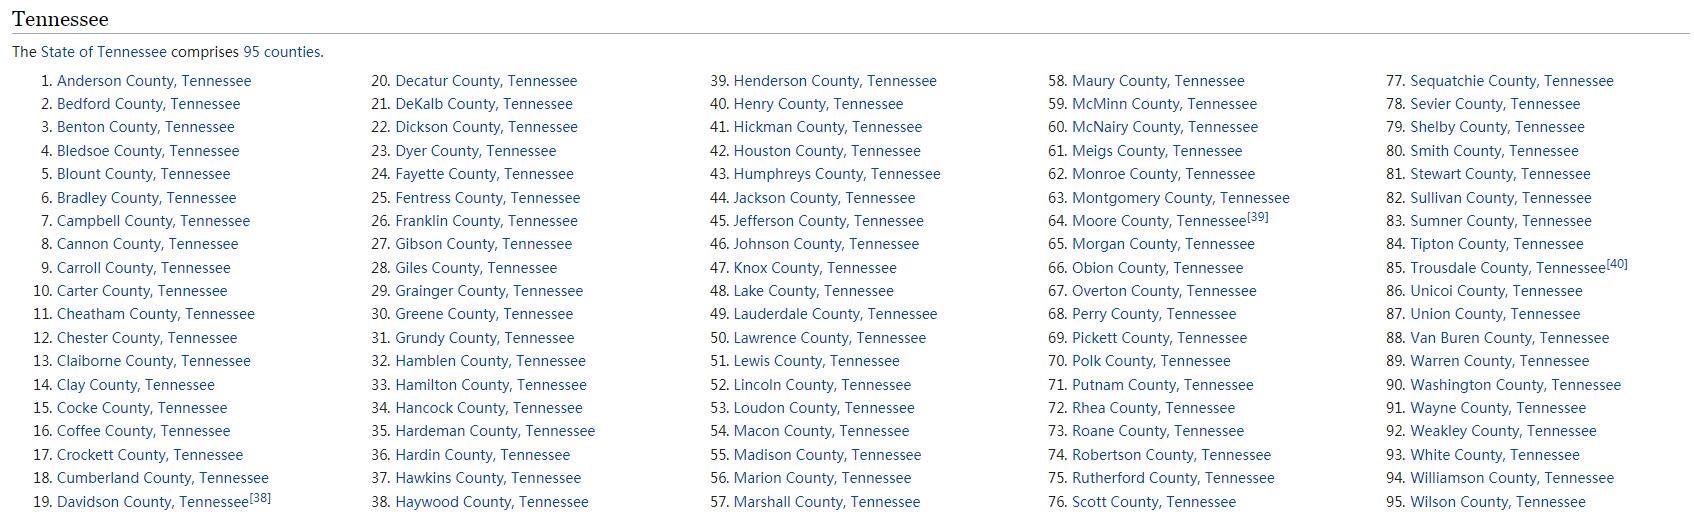 Tennessee Counties List